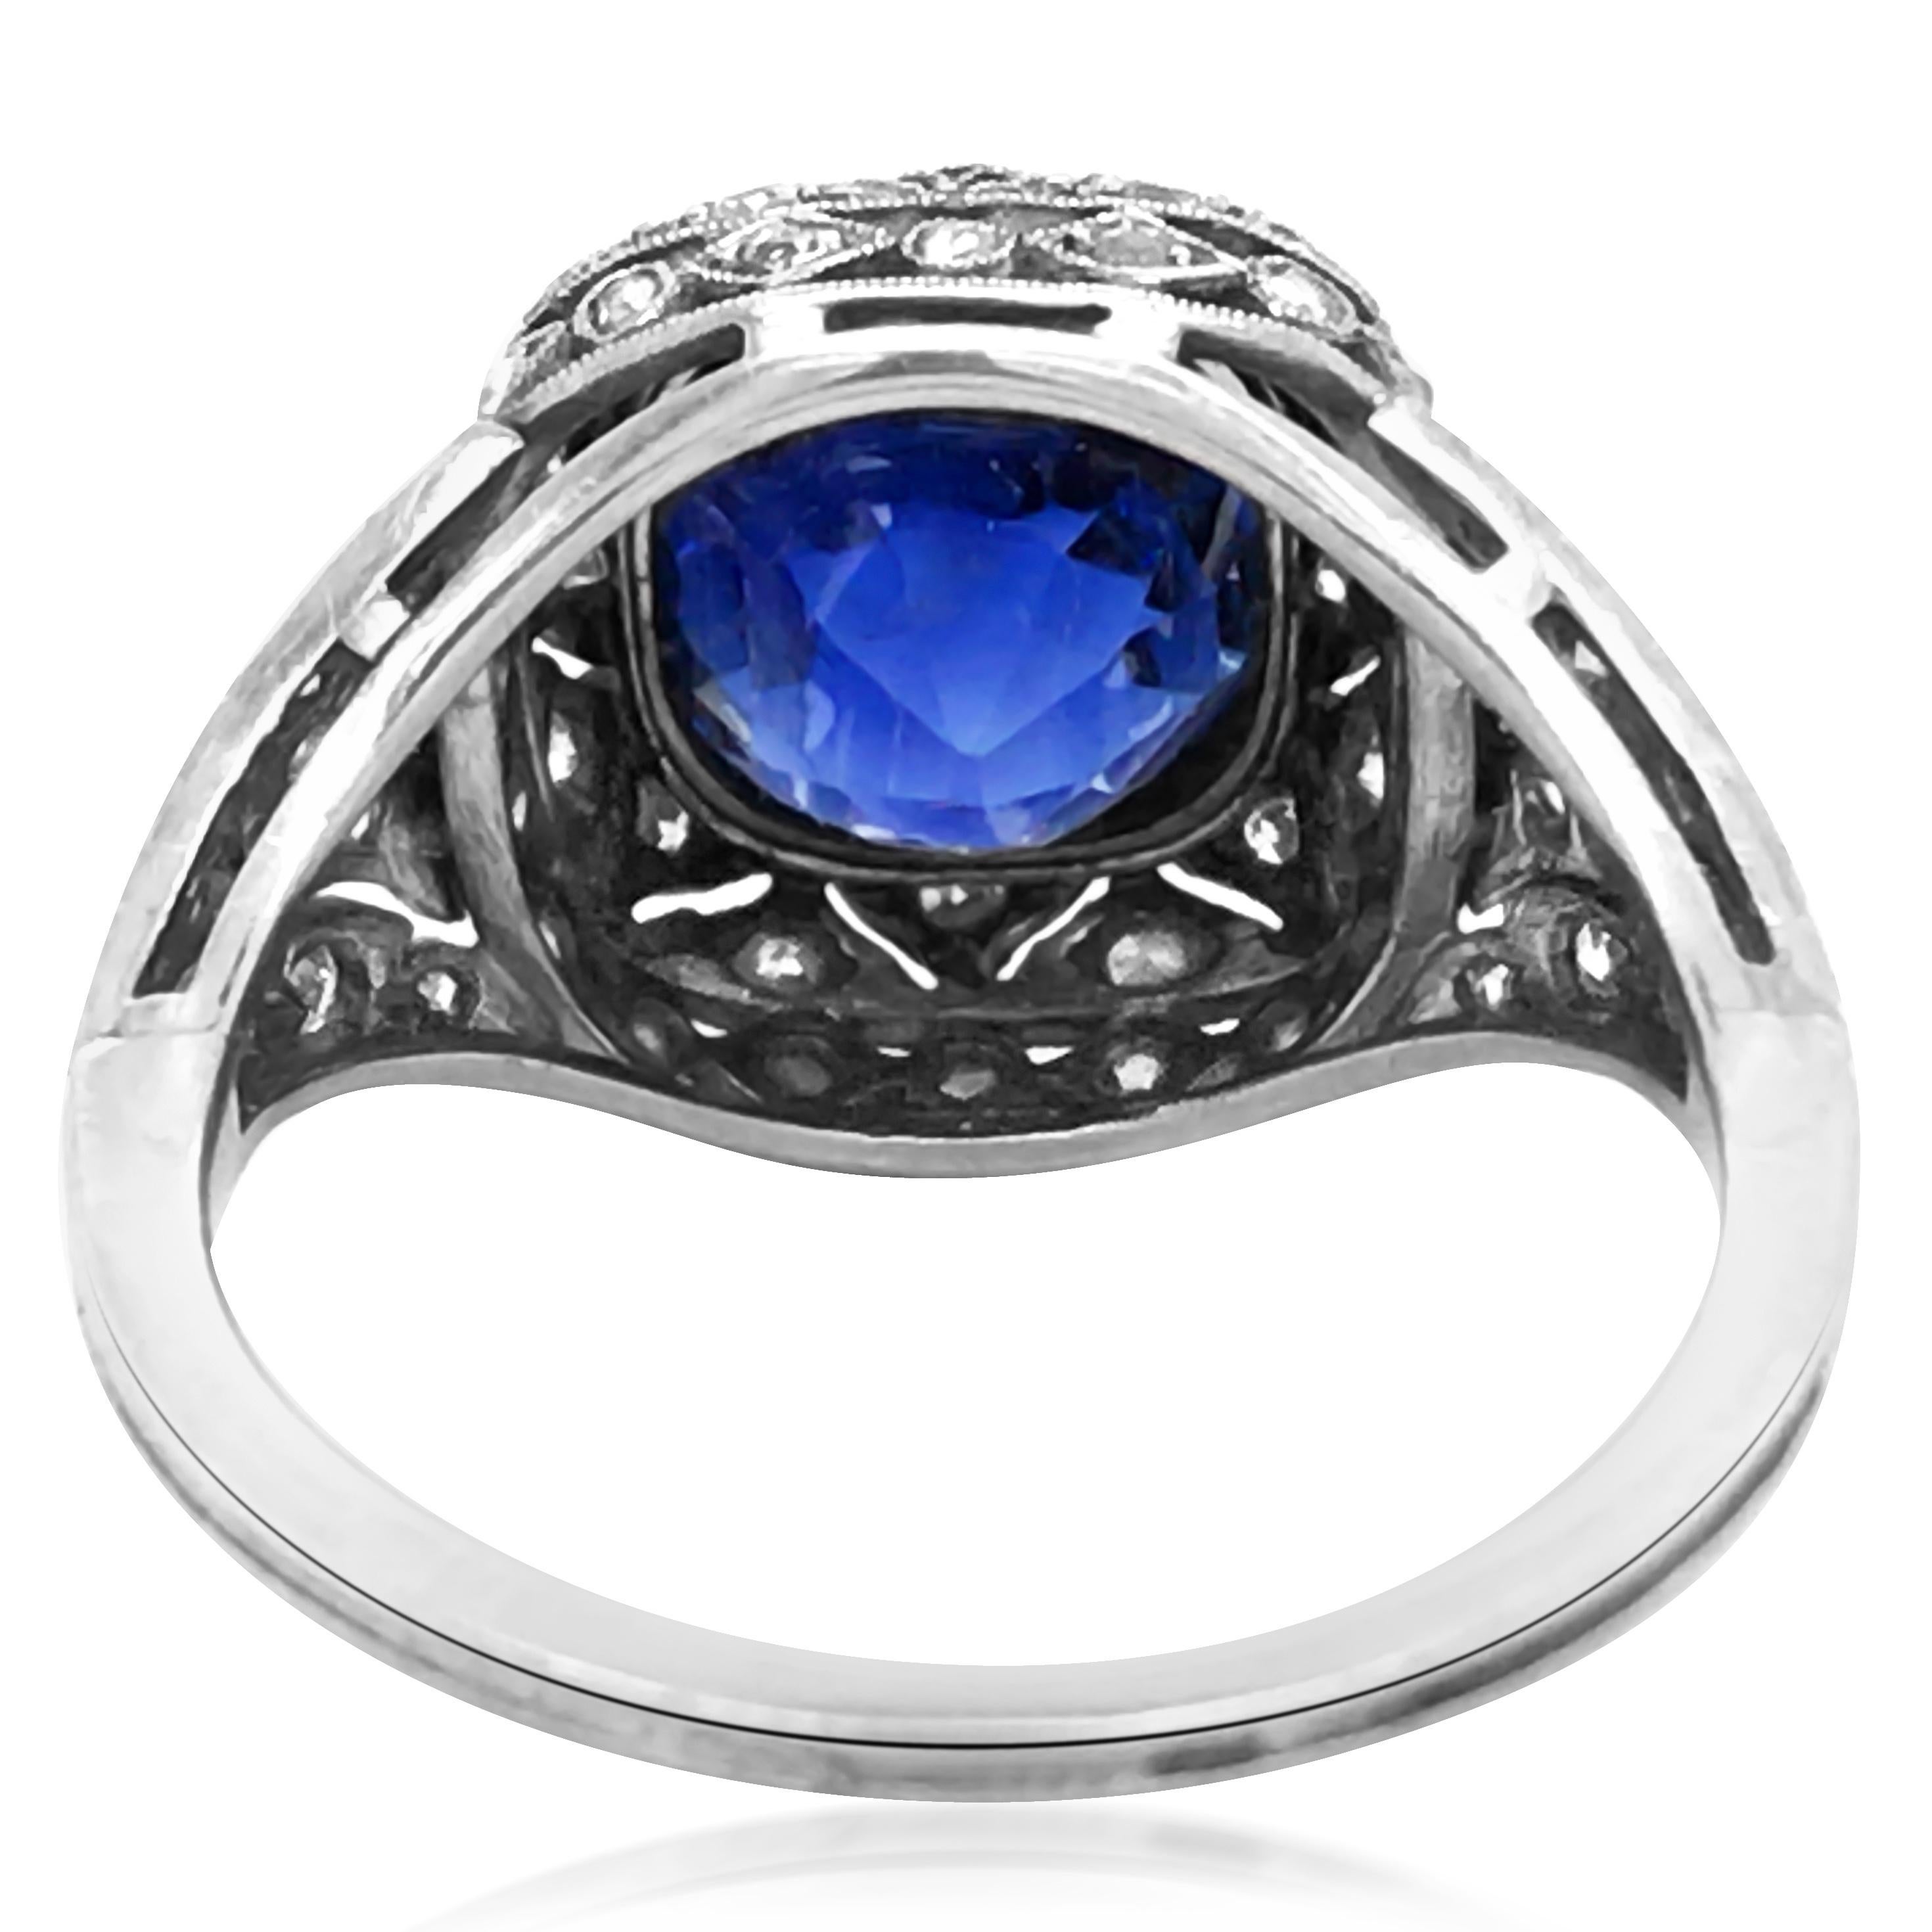 Belle Epoque 5.61ct Burma No-Heat Sapphire Diamond Ring, GIA In Good Condition For Sale In New York, NY